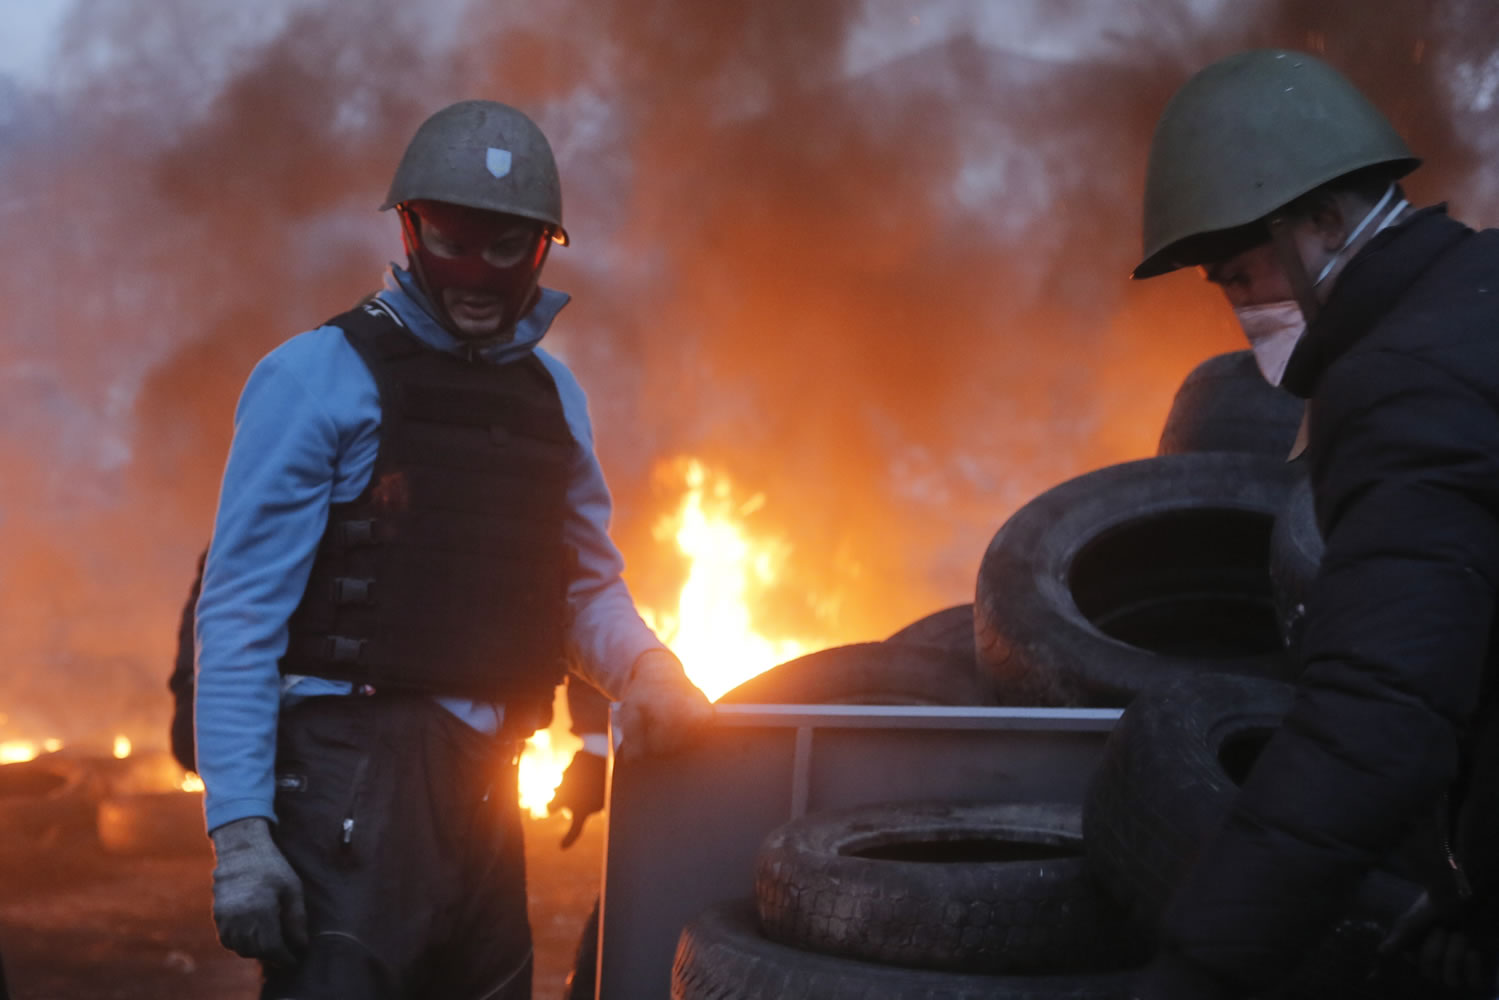 An activist carries a tire at the burning barricades, close to Independence Square, the epicenter of the country's current unrest, in Kiev, Ukraine, on Thursday.